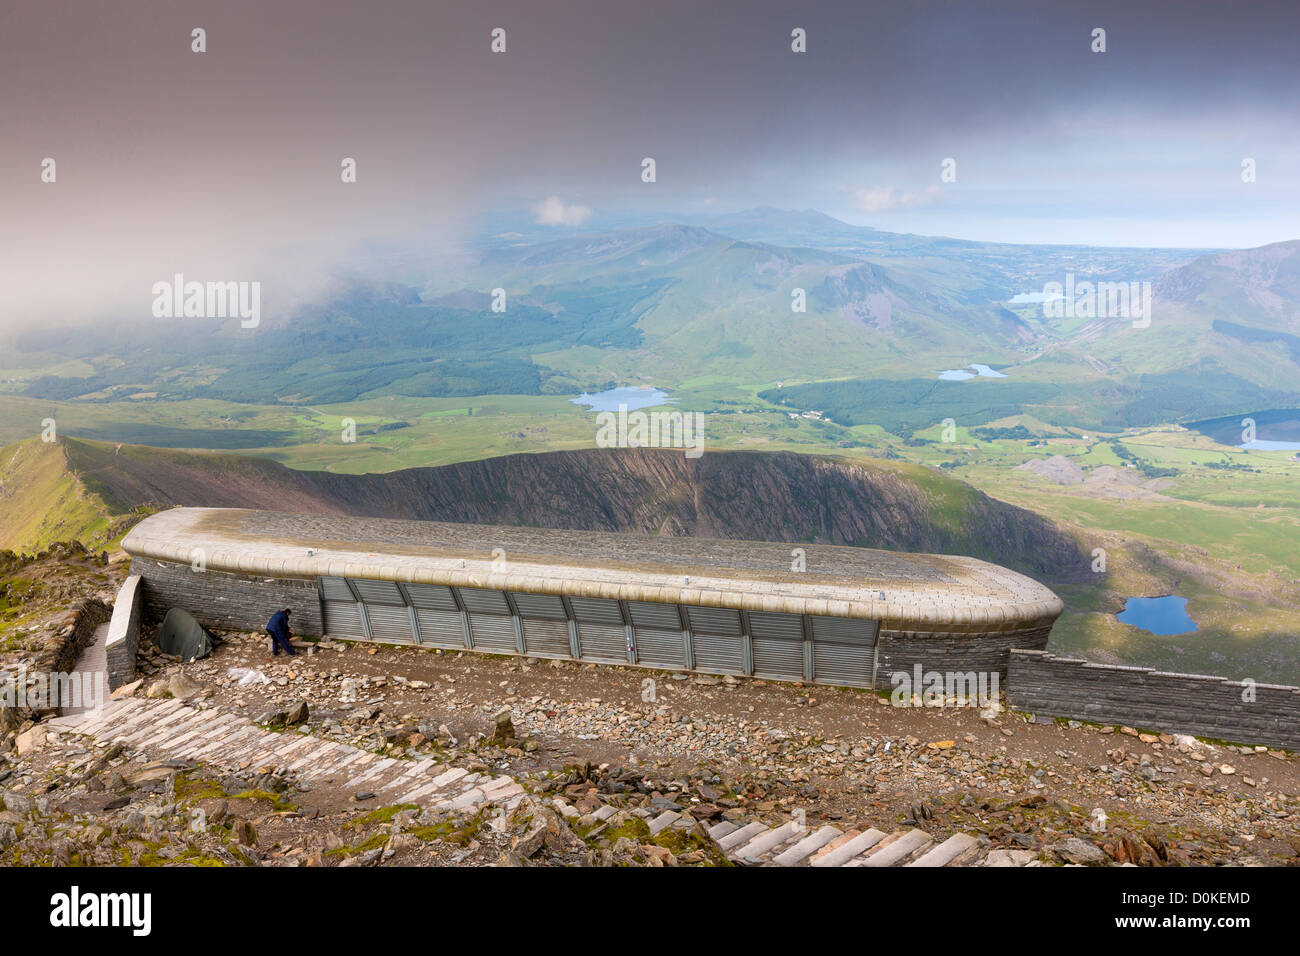 The new cafe and visitors centre at the summit of Mount Snowdon in the Snowdonia National Park. Stock Photo